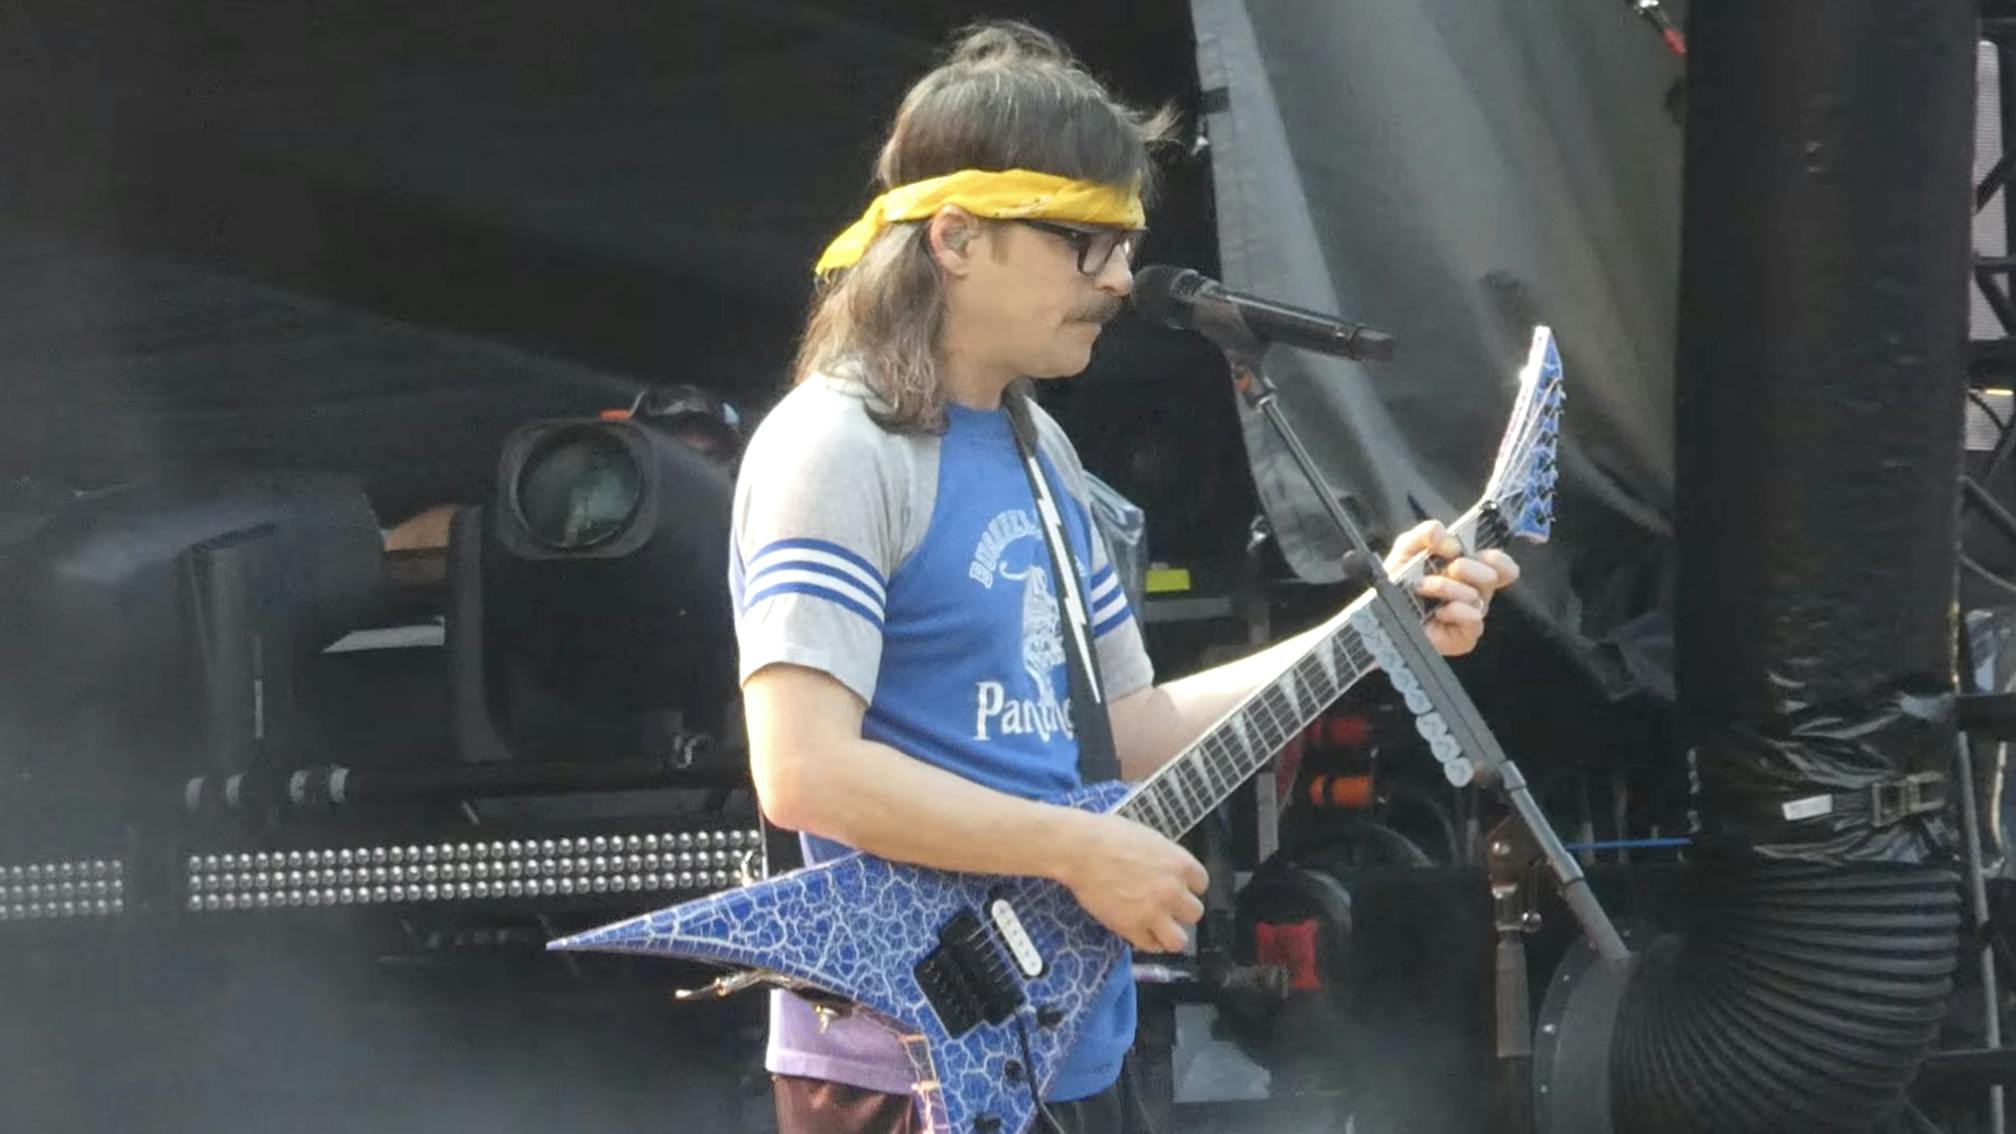 Watch Weezer and The Interrupters cover Fall Out Boy on the Hella Mega Tour